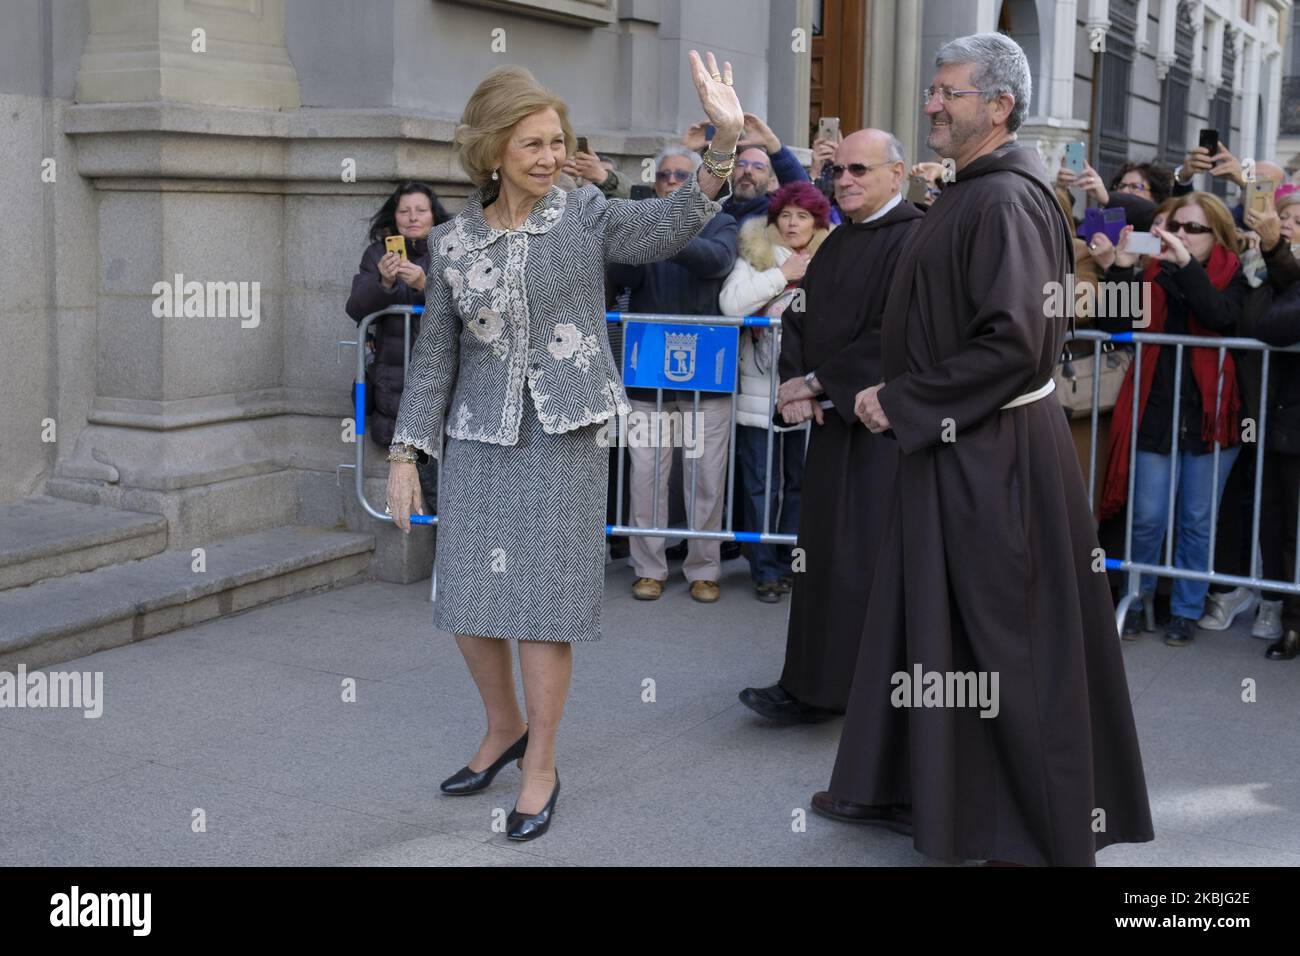 Queen Sofia of spain attends the traditional thanksgiving to Medinaceli on March 06, 2020 in Madrid, Spain. On the first Friday of March there is a tradition to kiss the feet of Cristo de Medinaceli sculpture to show devotion. Following instructions from the Cartagena Bishop, the congregation are not to kiss or touch the sculpture and exchanged the gesture by bowing their heads. (Photo by Oscar Gonzalez/NurPhoto) Stock Photo